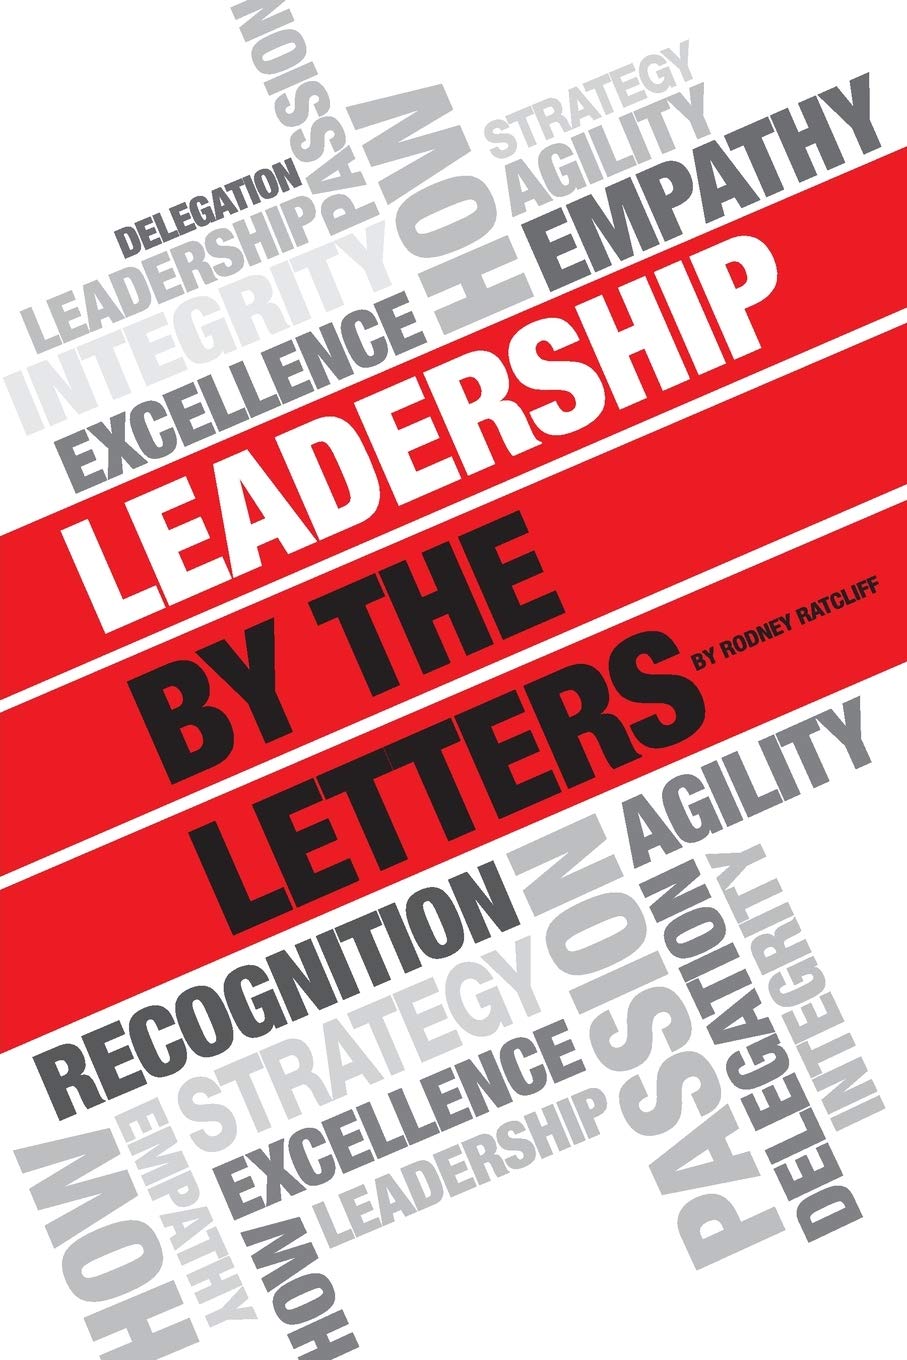 Leadership By The Letters: Stories, Thoughts, Approaches From A Leader